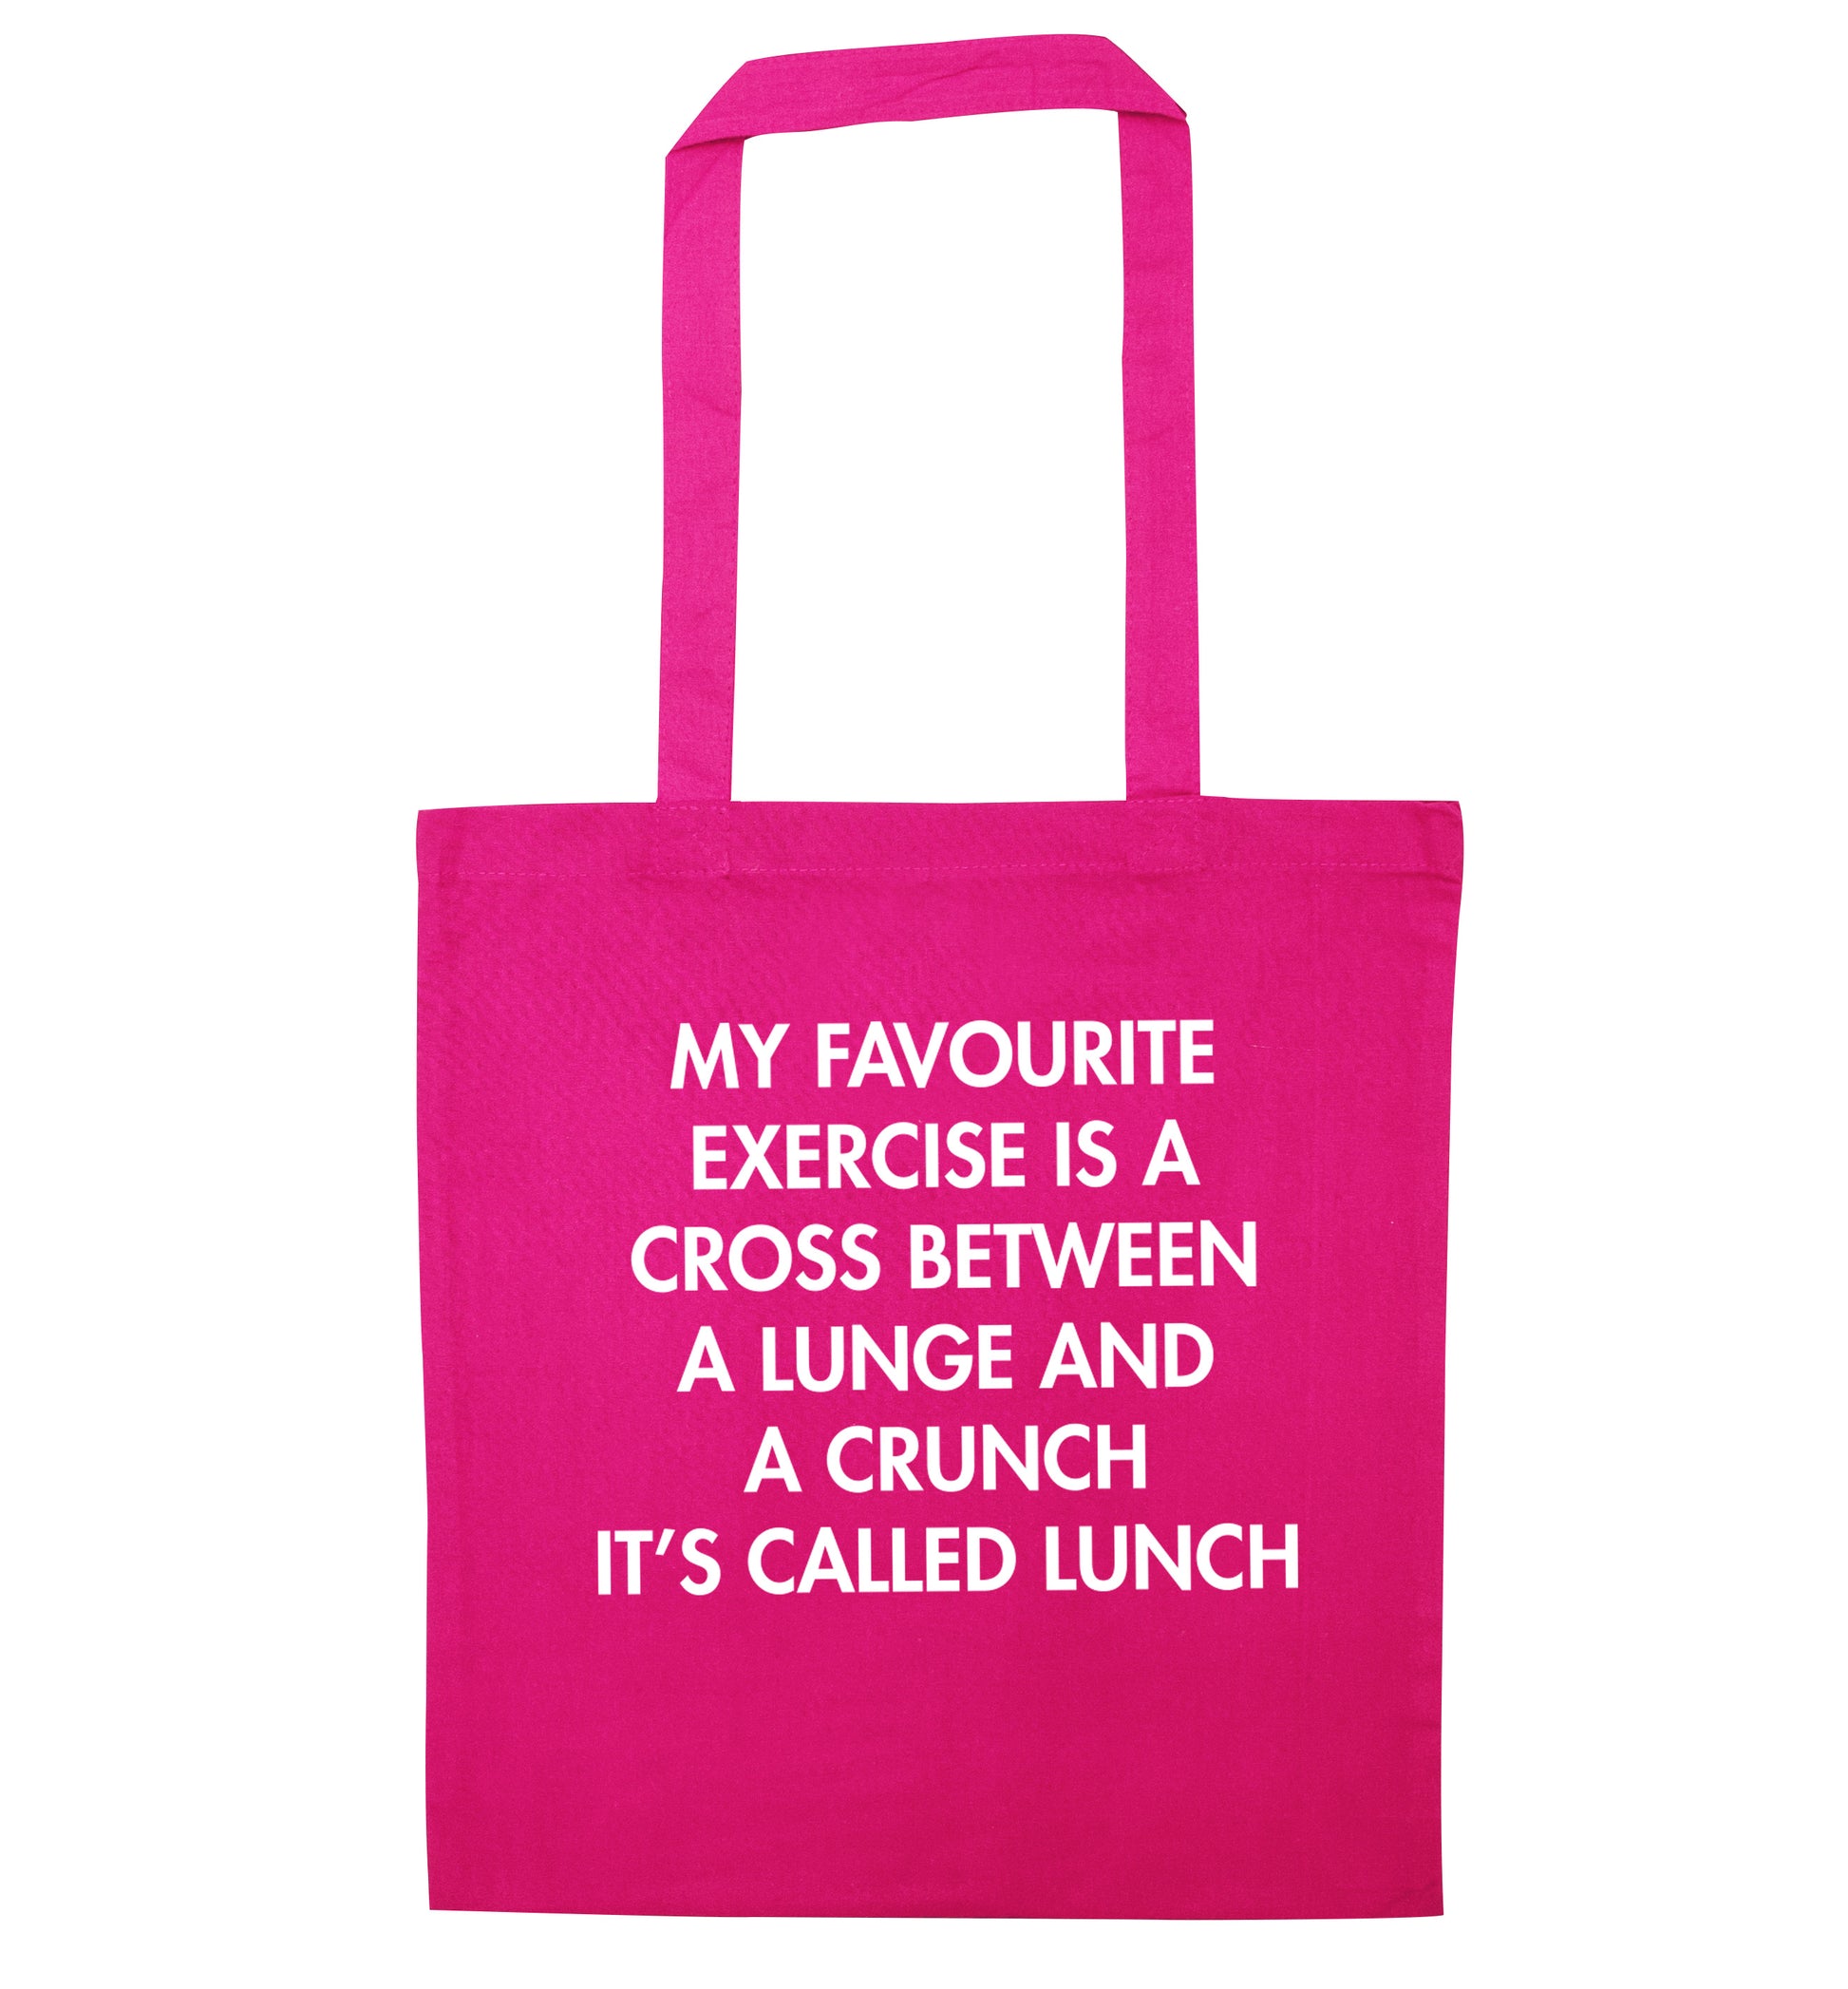 My favourite exercise is a cross between a lung and a crunch it's called lunch pink tote bag